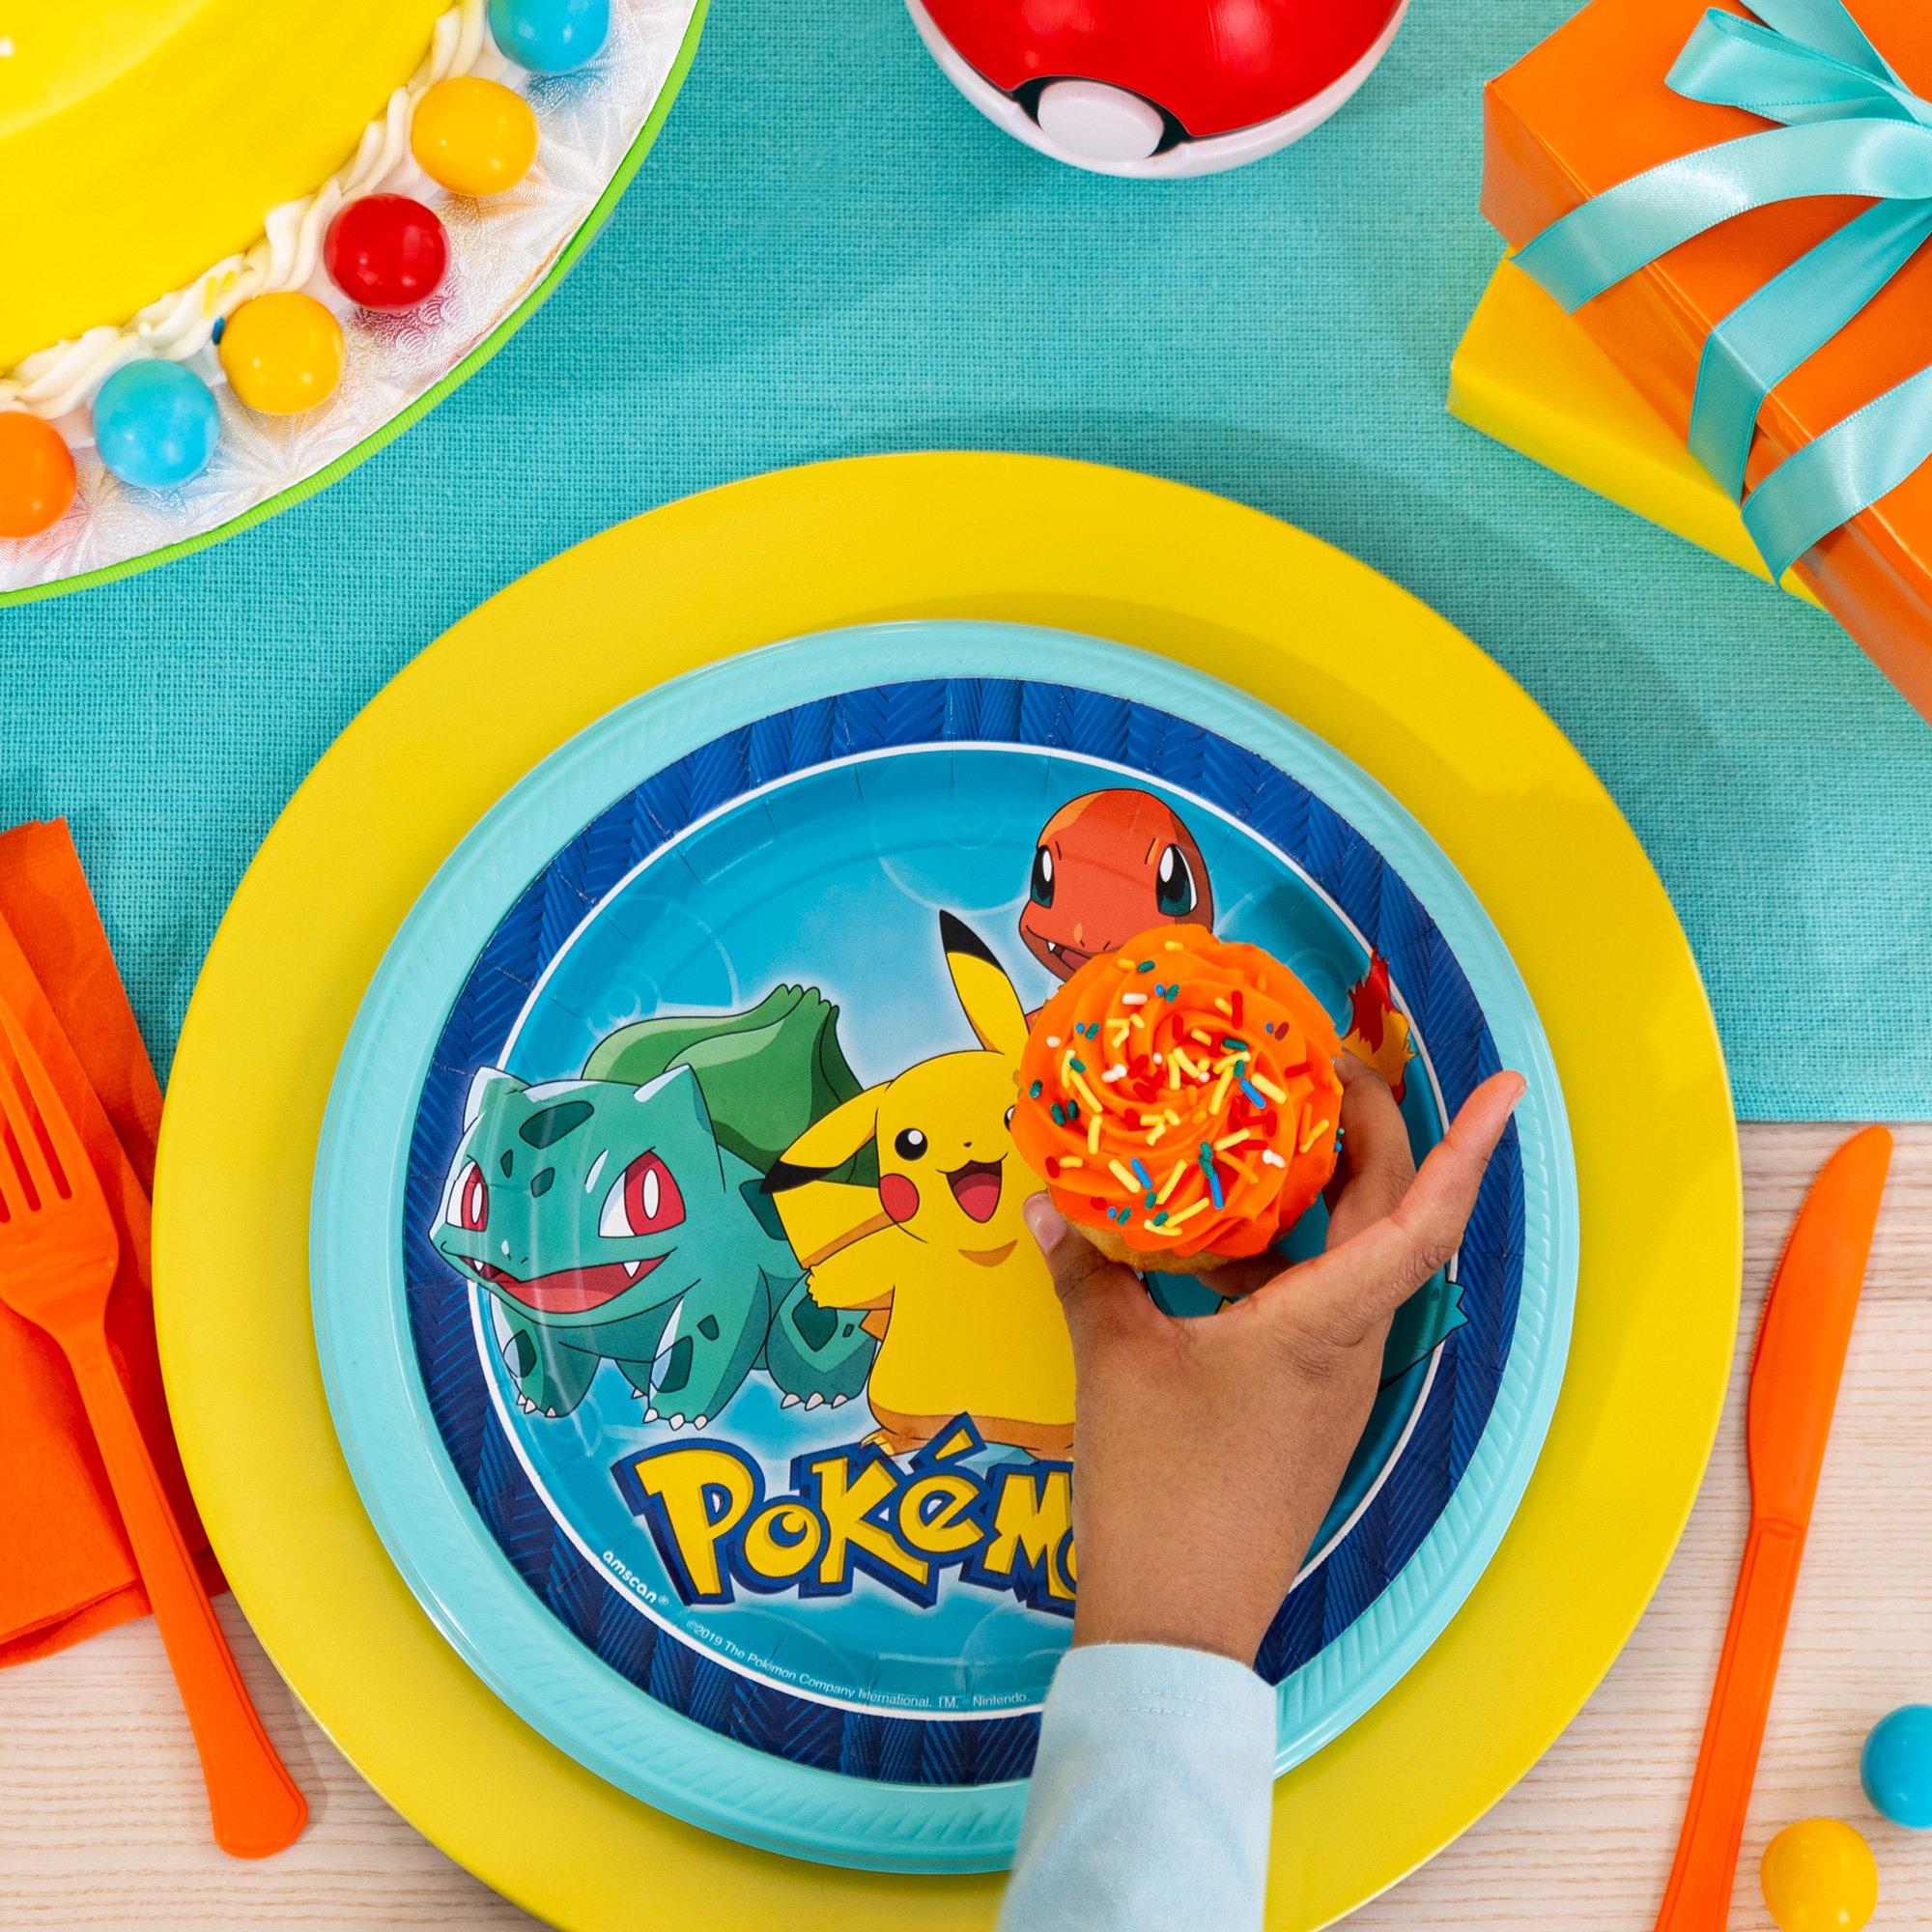  Pokemon Party Supplies with Tableware, Favors and